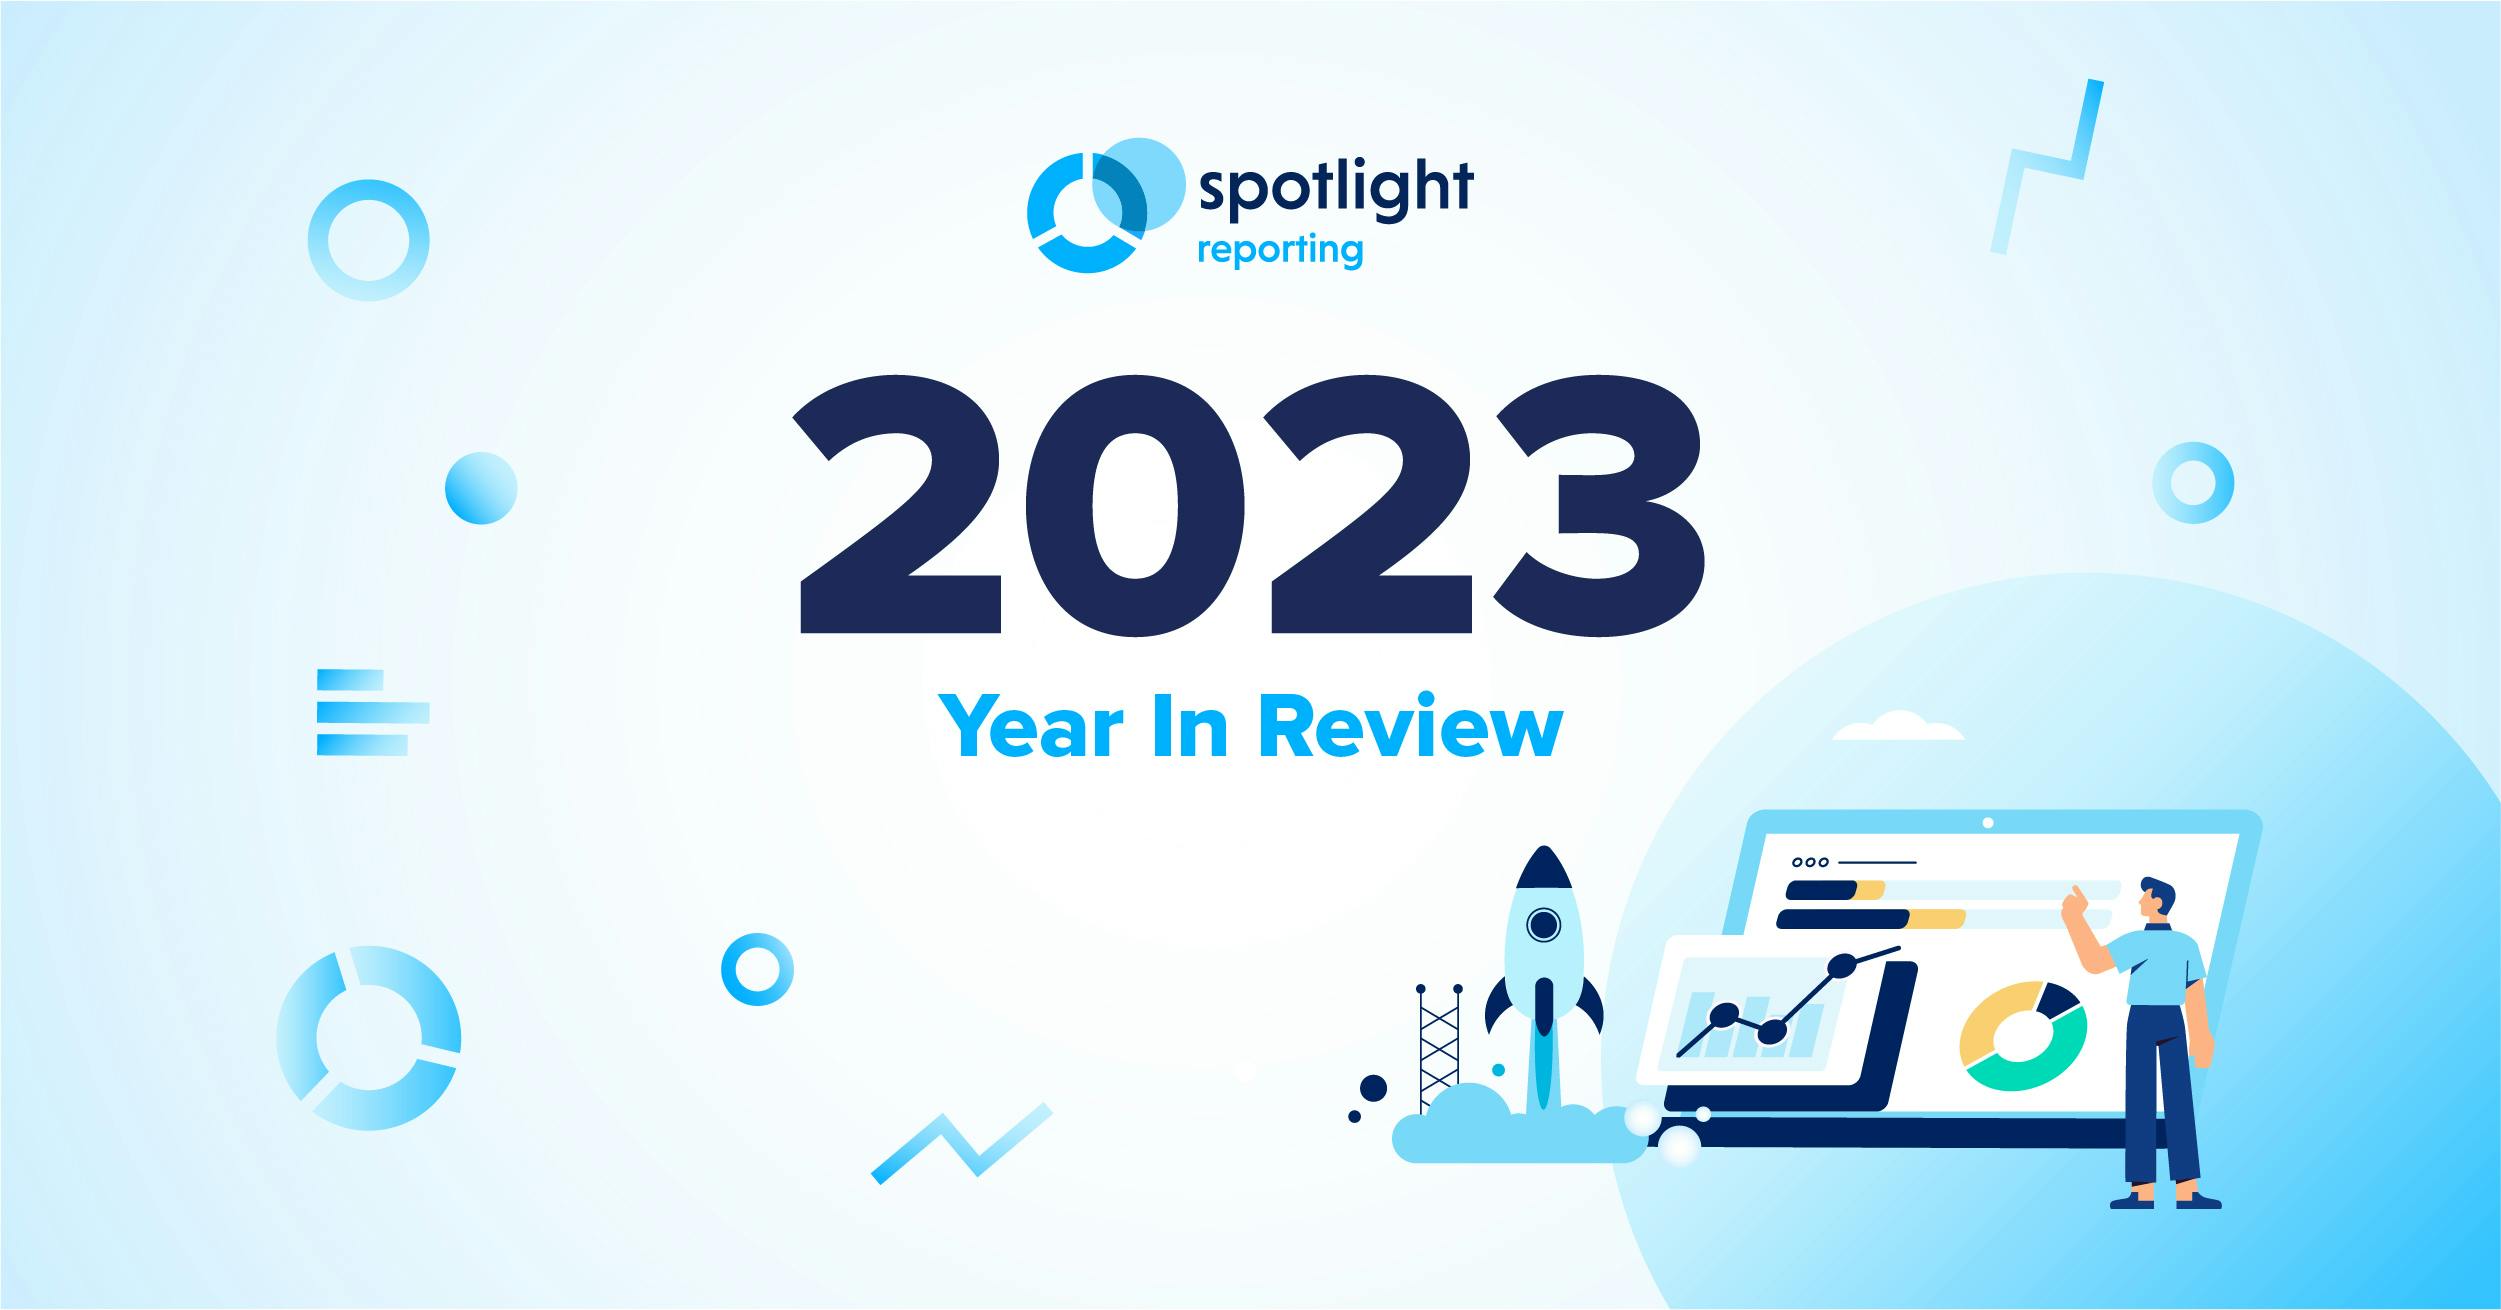 Spotlight Reporting in 2023: A Year of Innovation logo